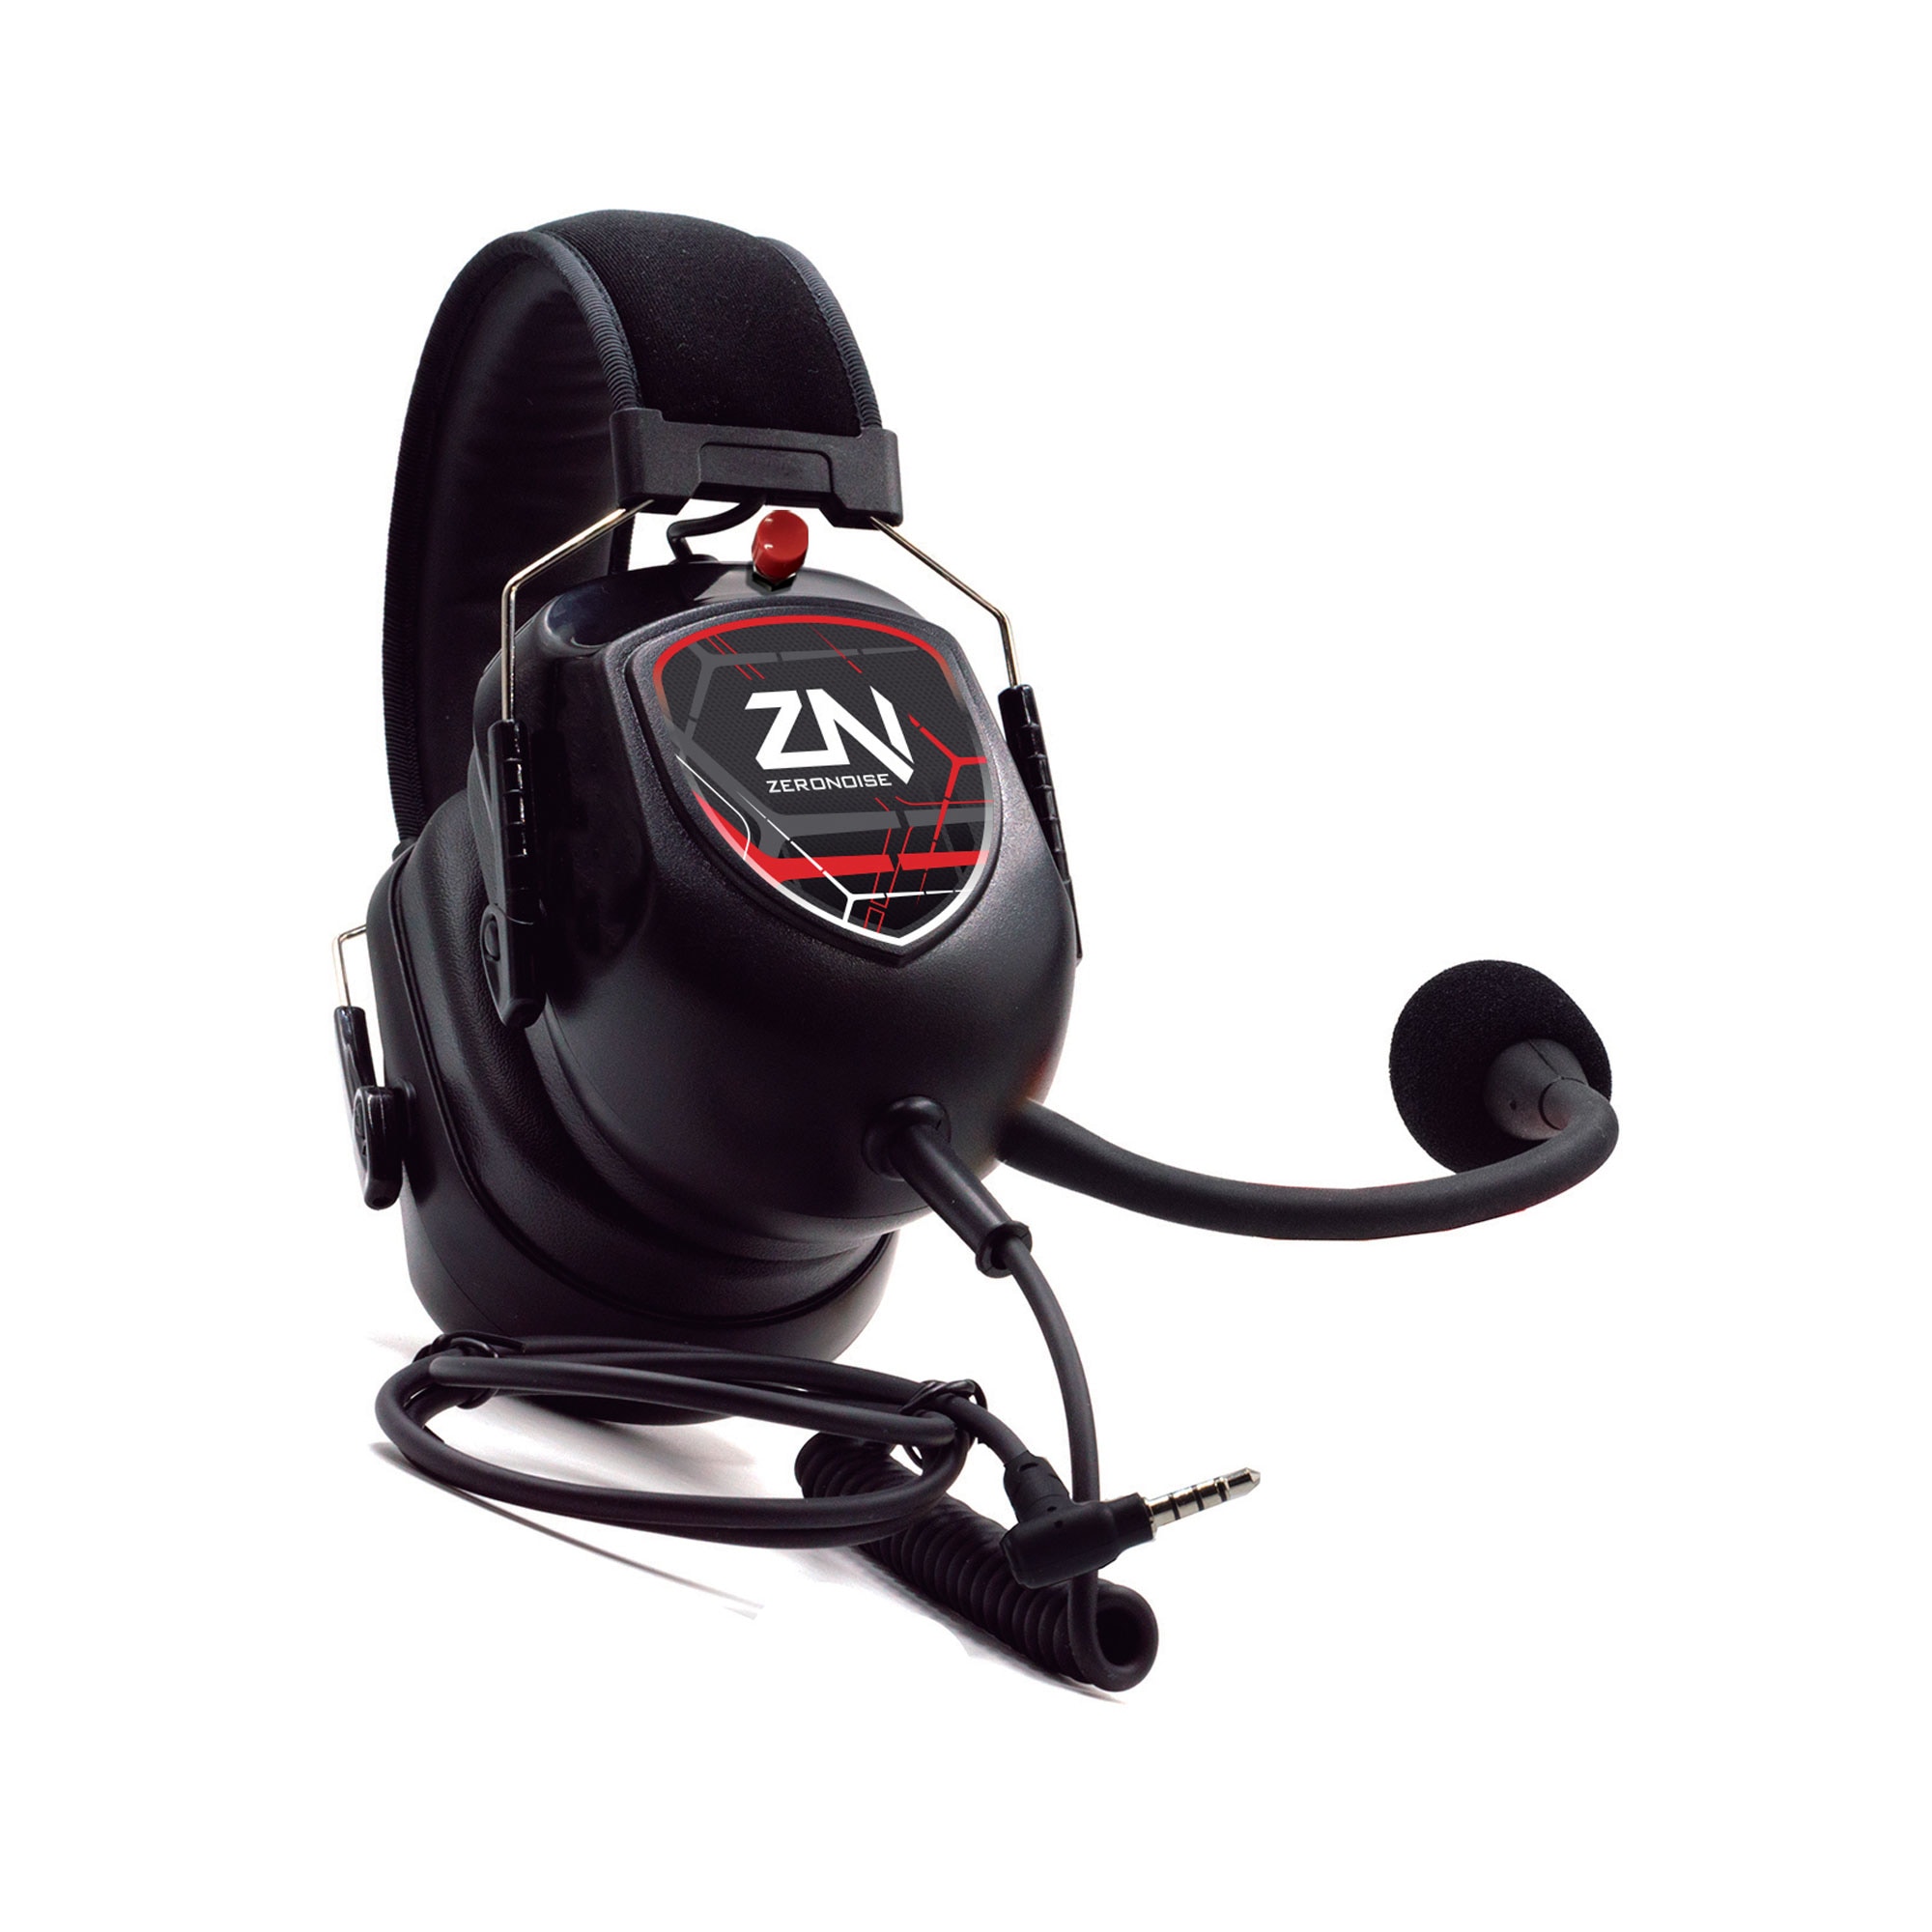 Pit Link Trainer ZN Professionell Karting Interom System (Android)